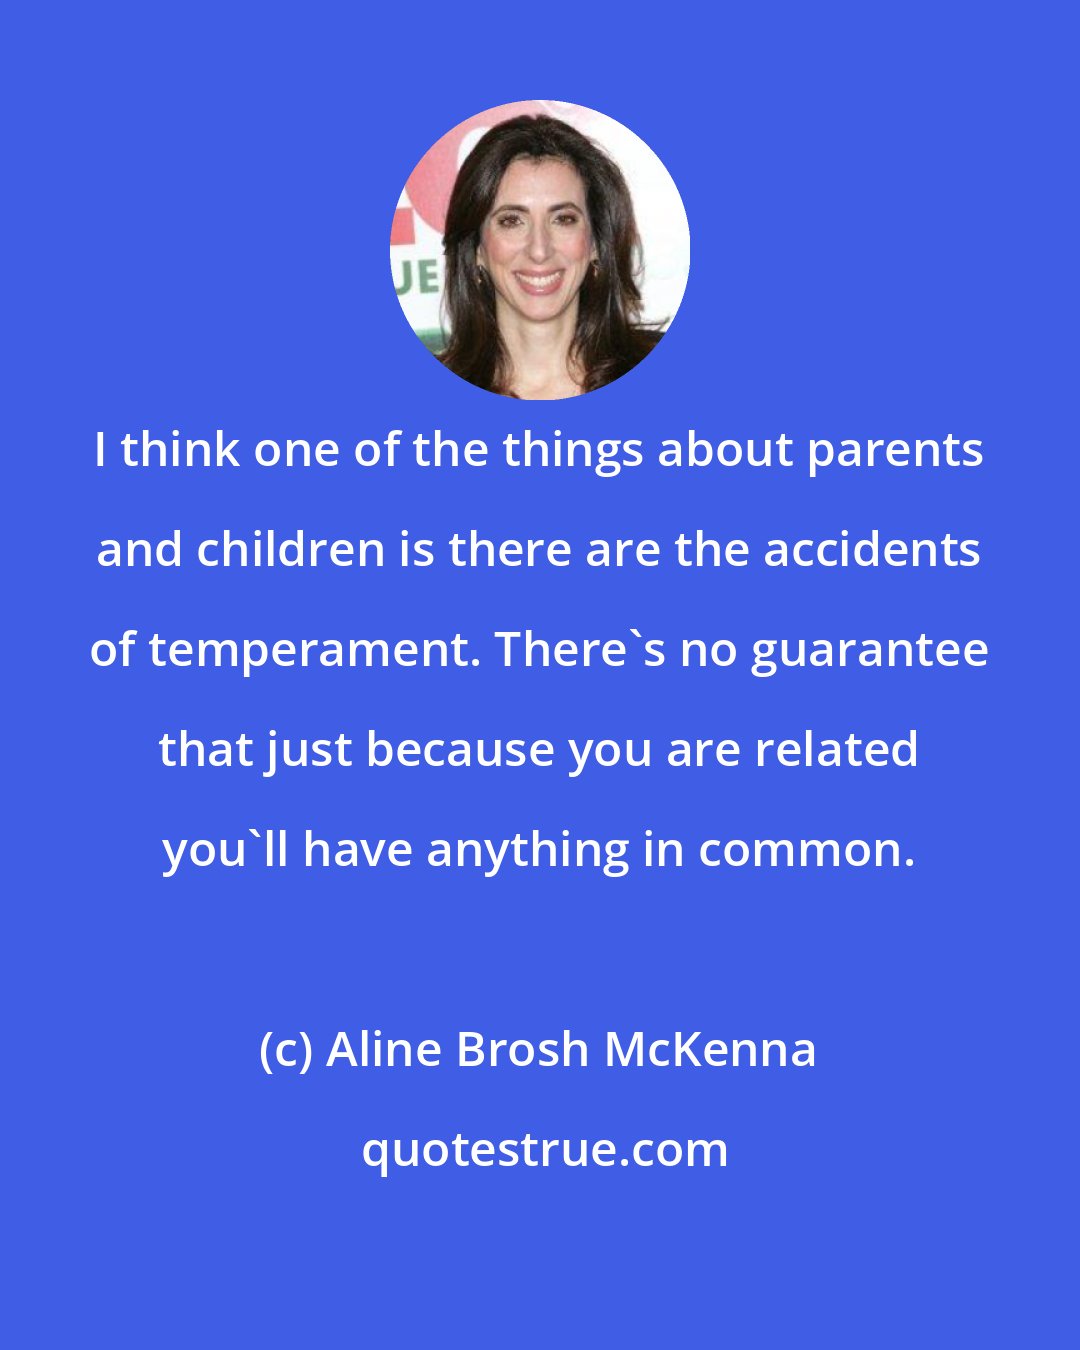 Aline Brosh McKenna: I think one of the things about parents and children is there are the accidents of temperament. There's no guarantee that just because you are related you'll have anything in common.